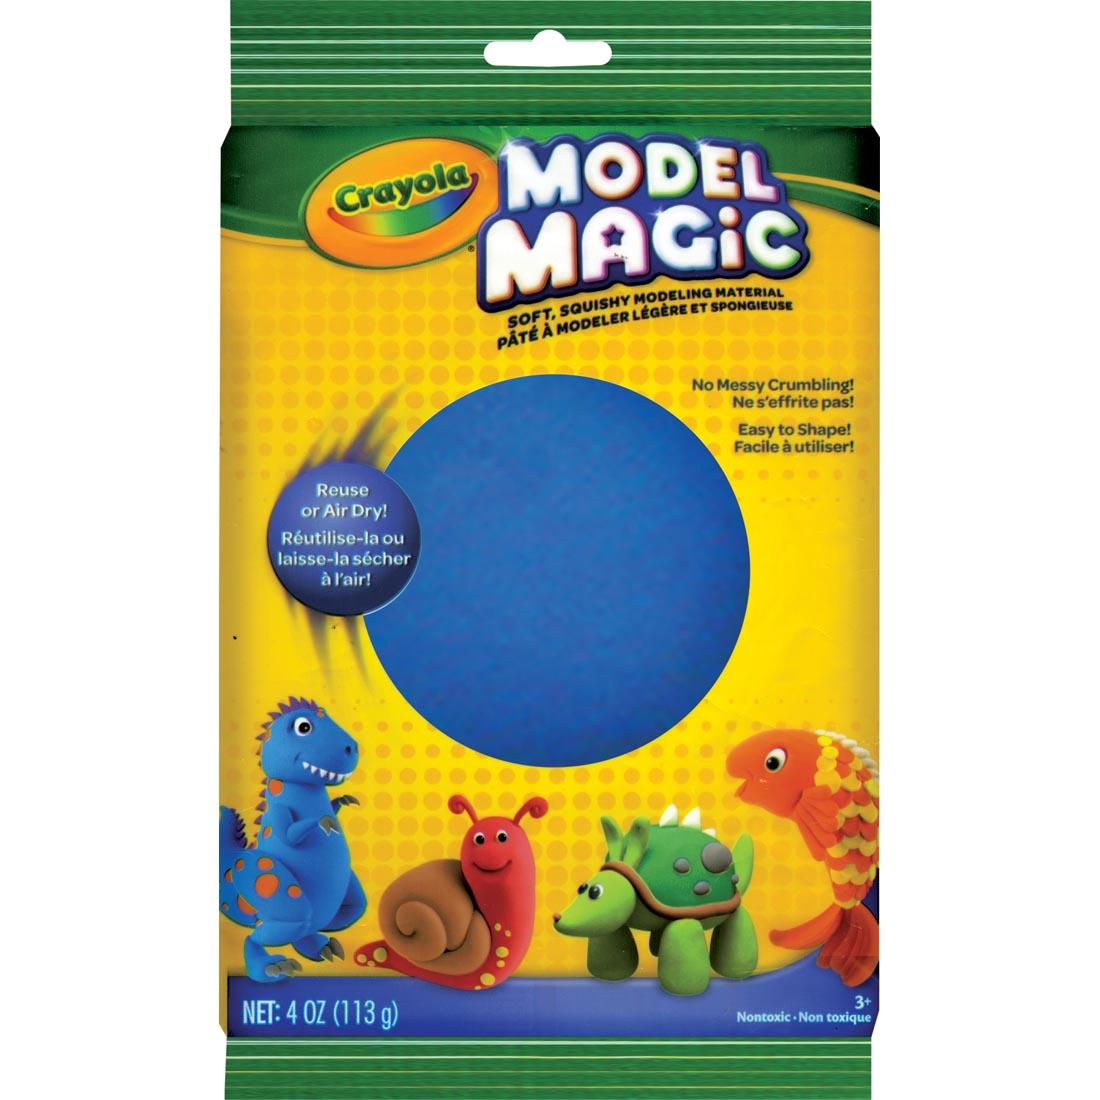 Package of Blue Crayola Model Magic